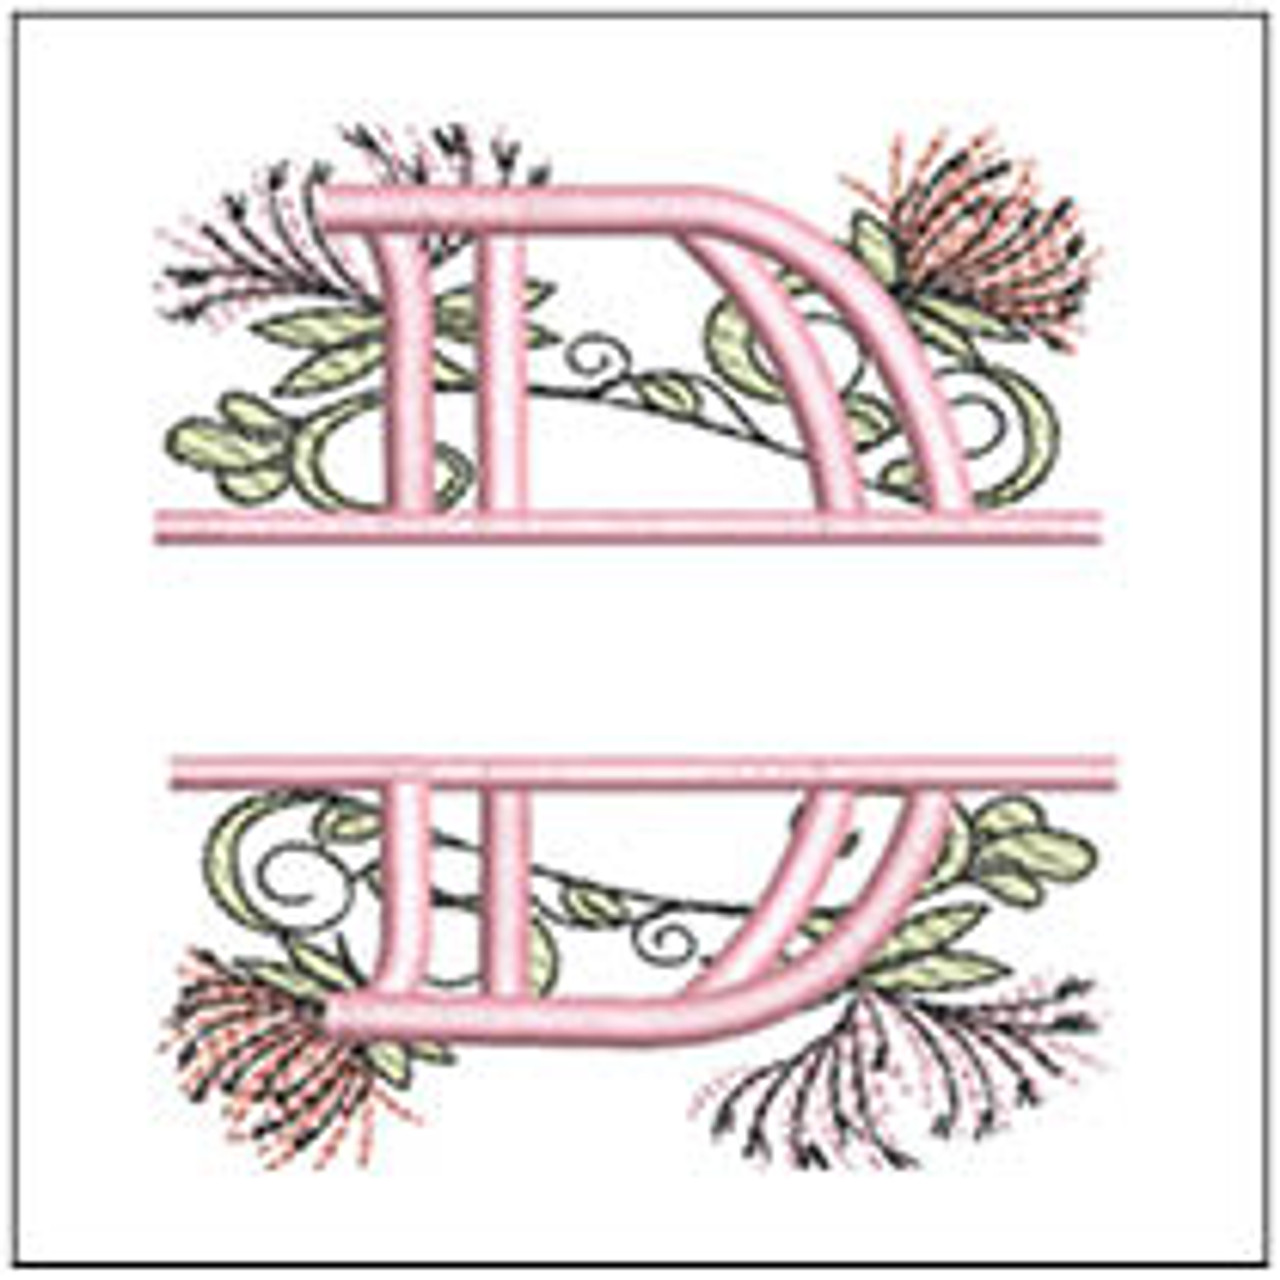 Floral Split Monogram ABCS - D - Fits a 4x4 Hoop, Machine Embroidery  Pattern, - Tattered Stitch Embroideries